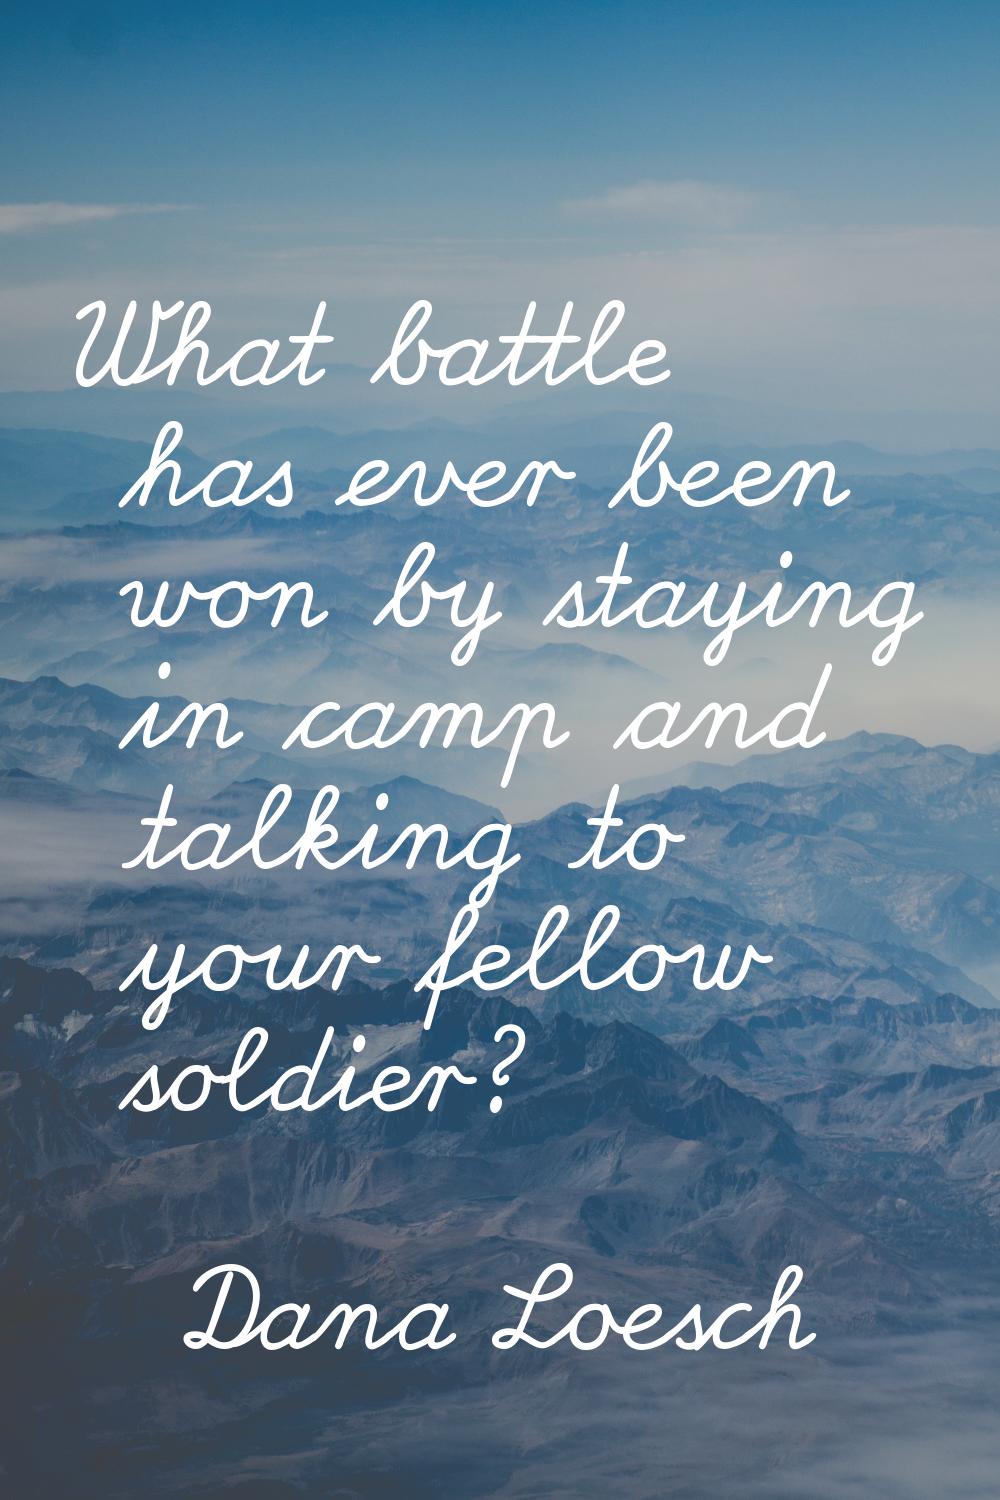 What battle has ever been won by staying in camp and talking to your fellow soldier?